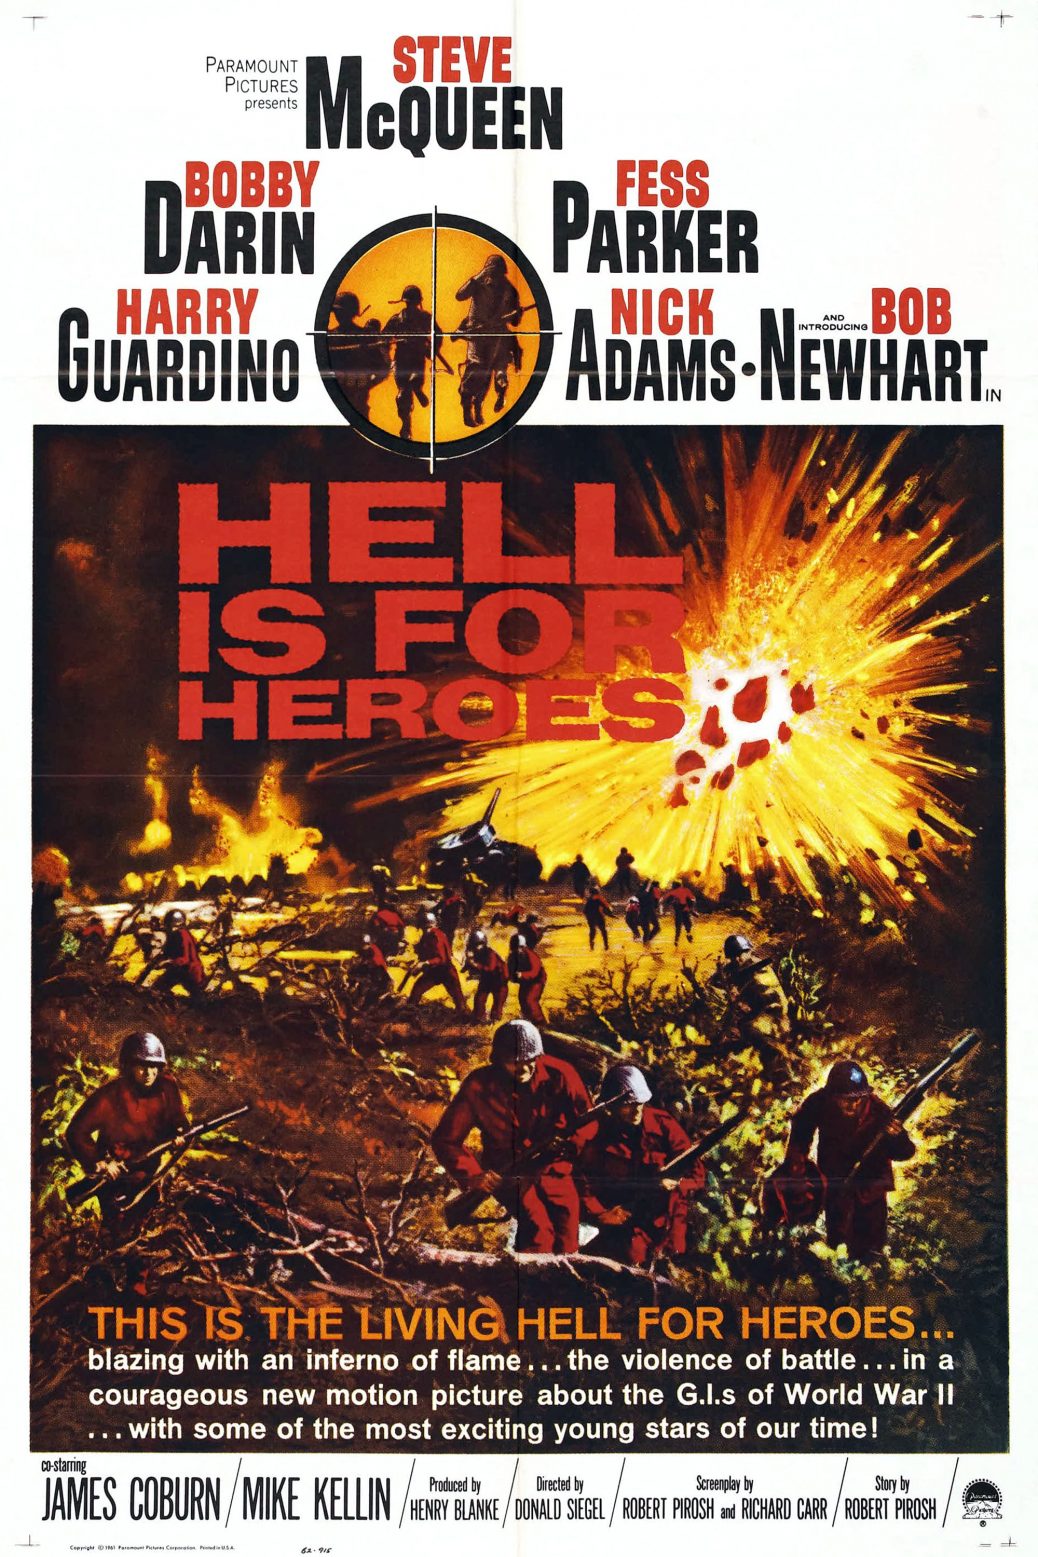 Poster for the movie "Hell Is for Heroes"